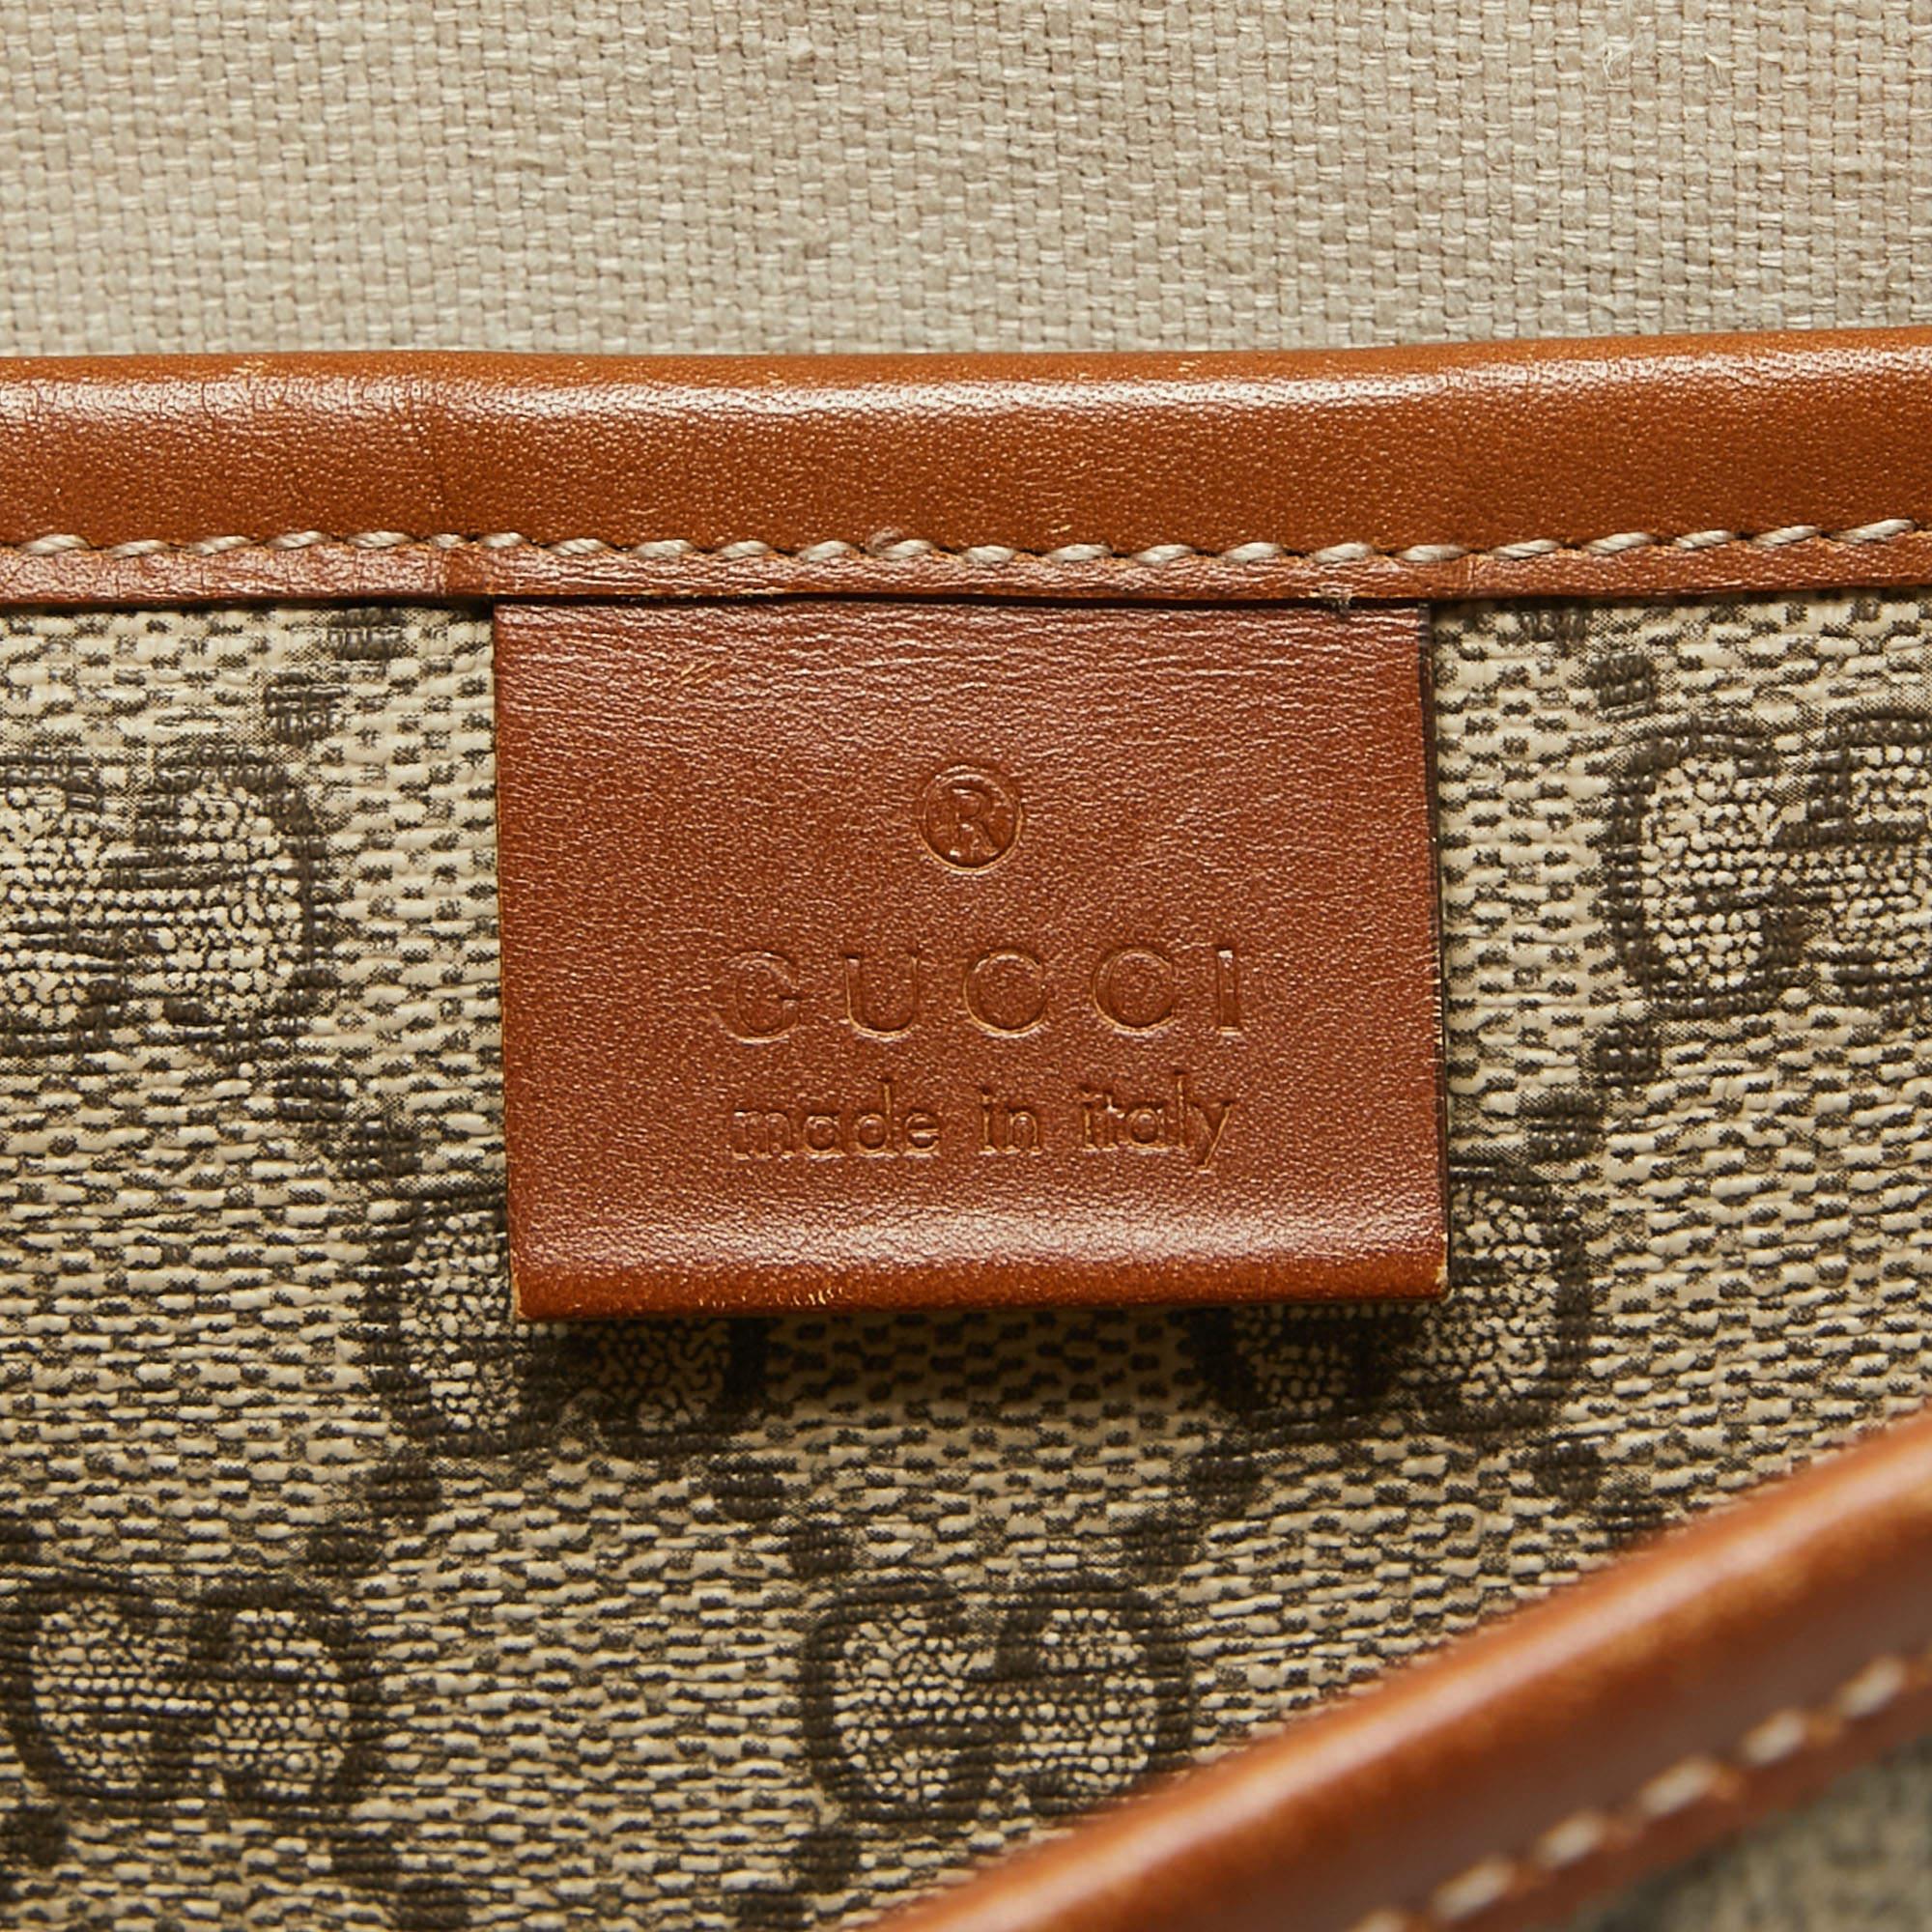 Gucci Beige/Brown GG Supreme Canvas And Leather Messenger Bag 4